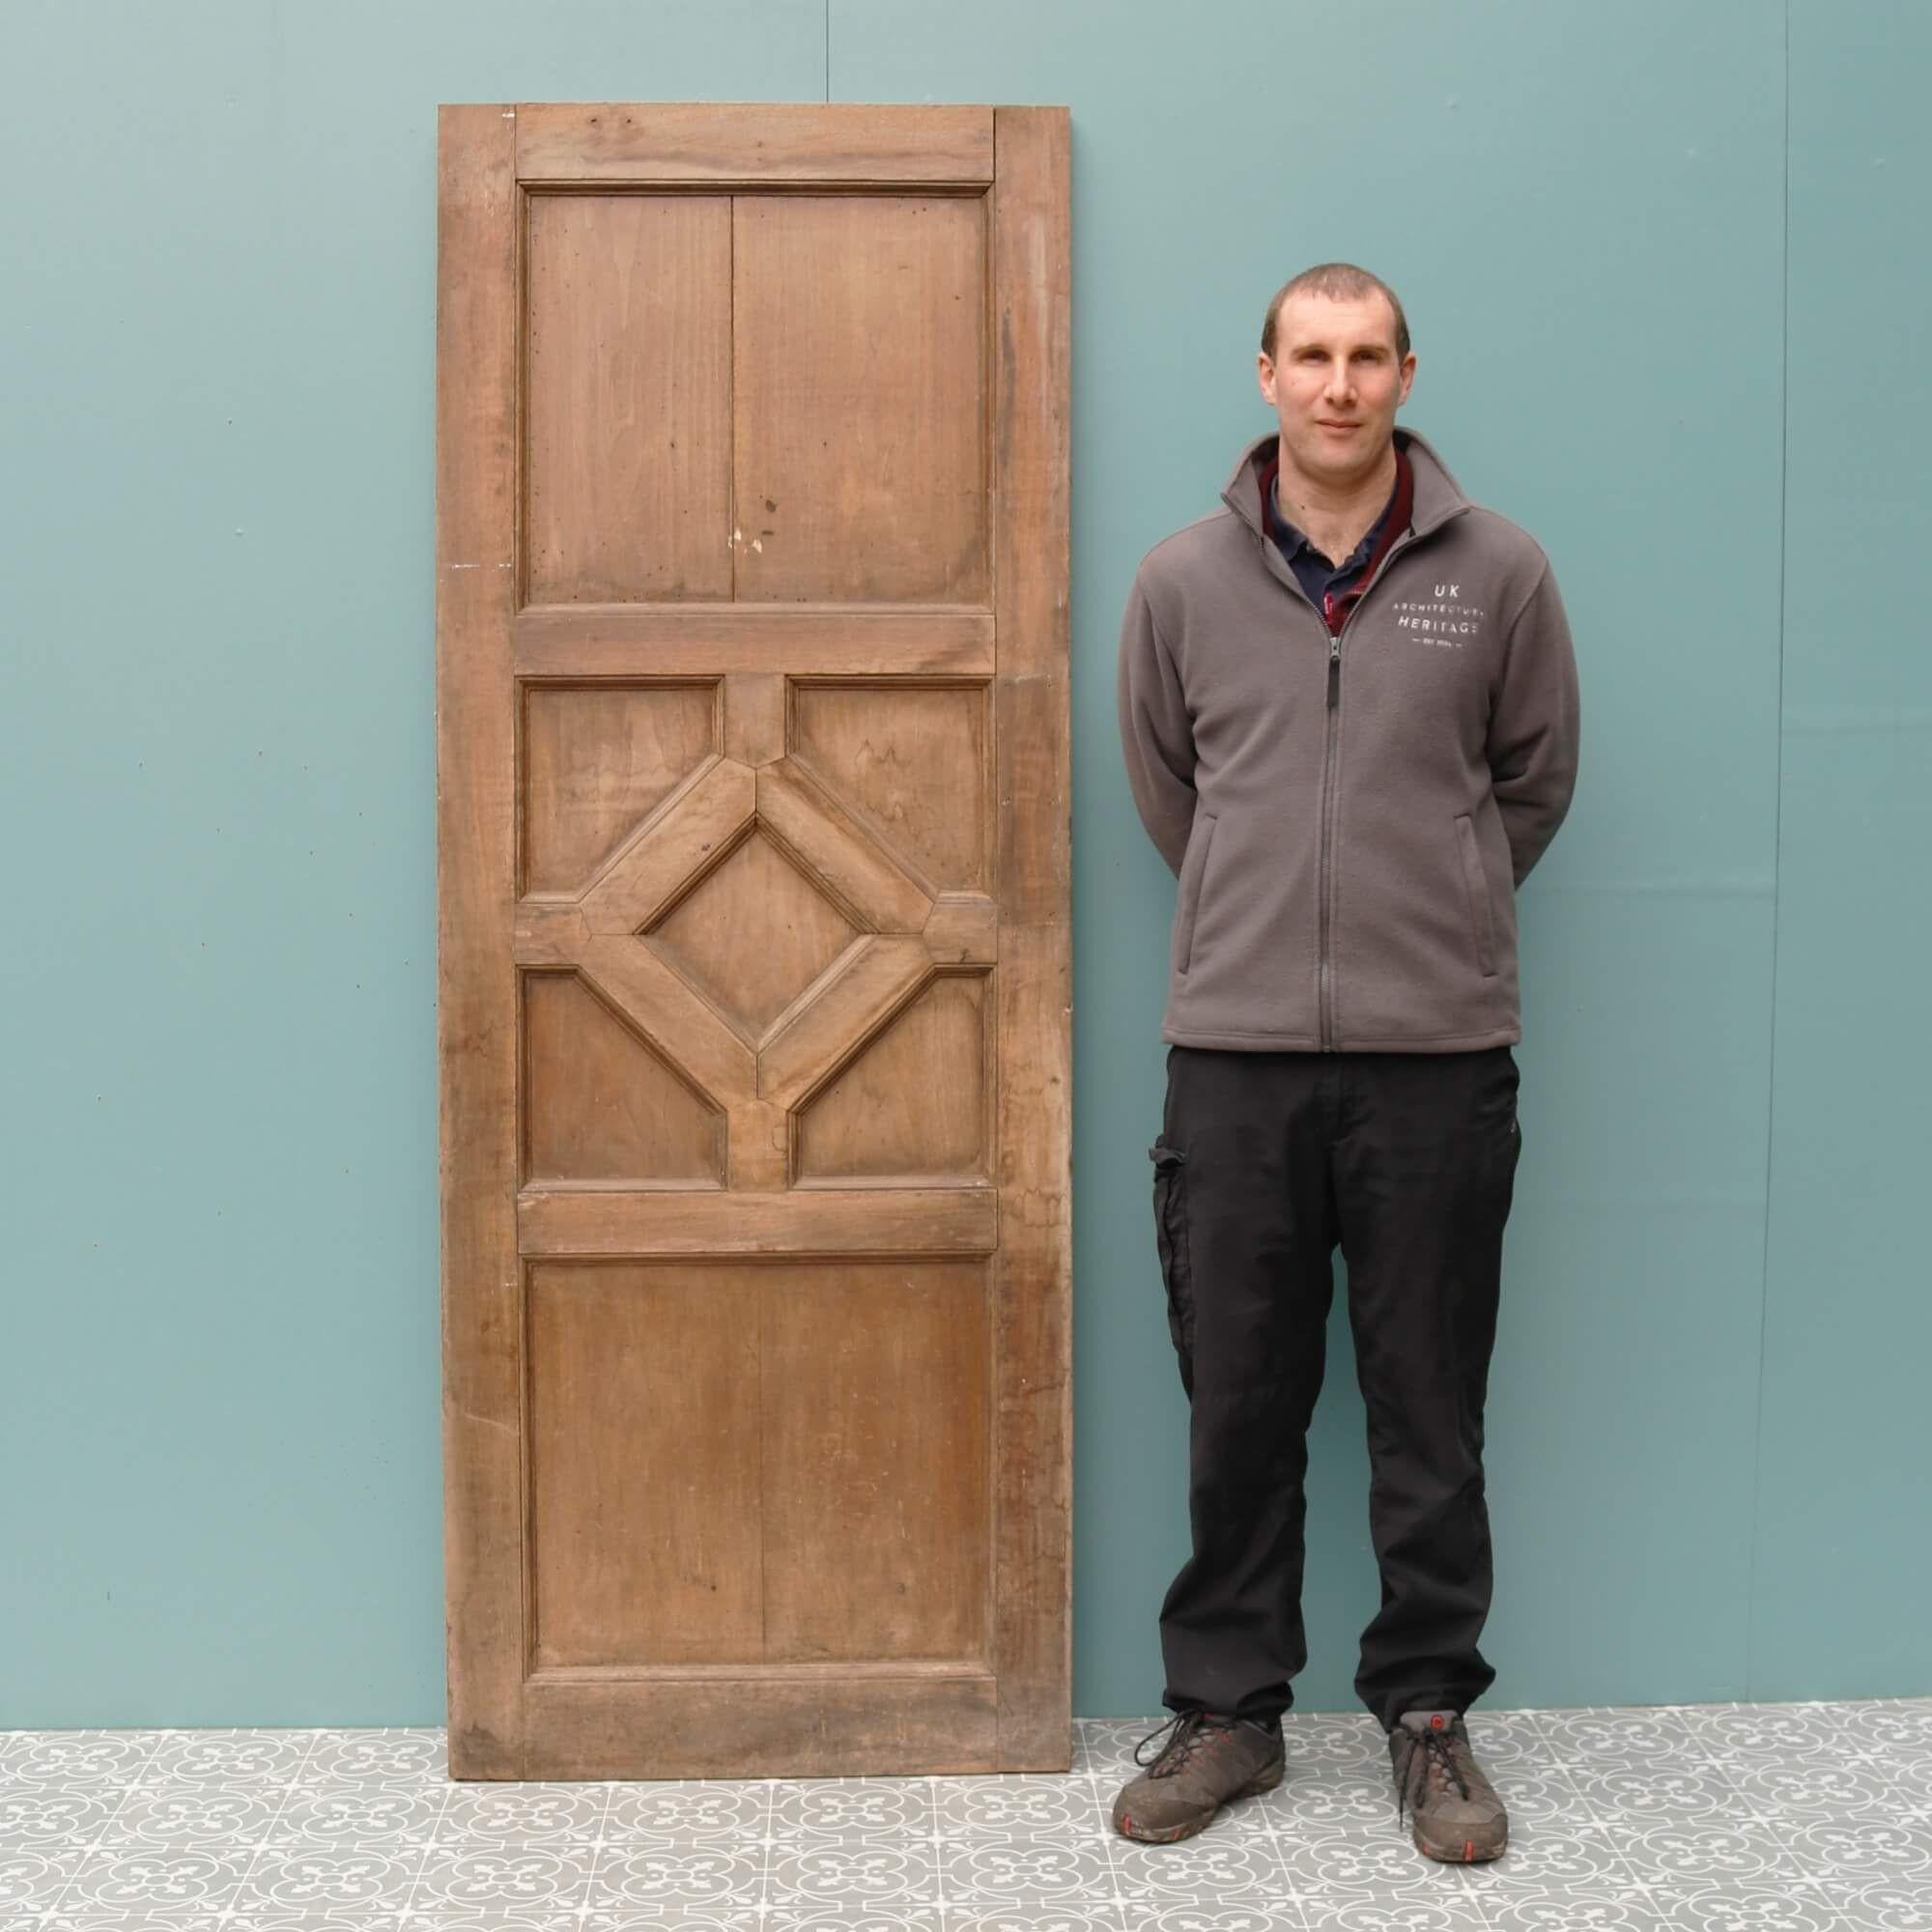 An unusual early 20th century reclaimed mahogany internal door with a distinctive geometric design to both sides – a brilliant statement piece for properties old and new. If not a door, it could be used as an architectural panel for decorative